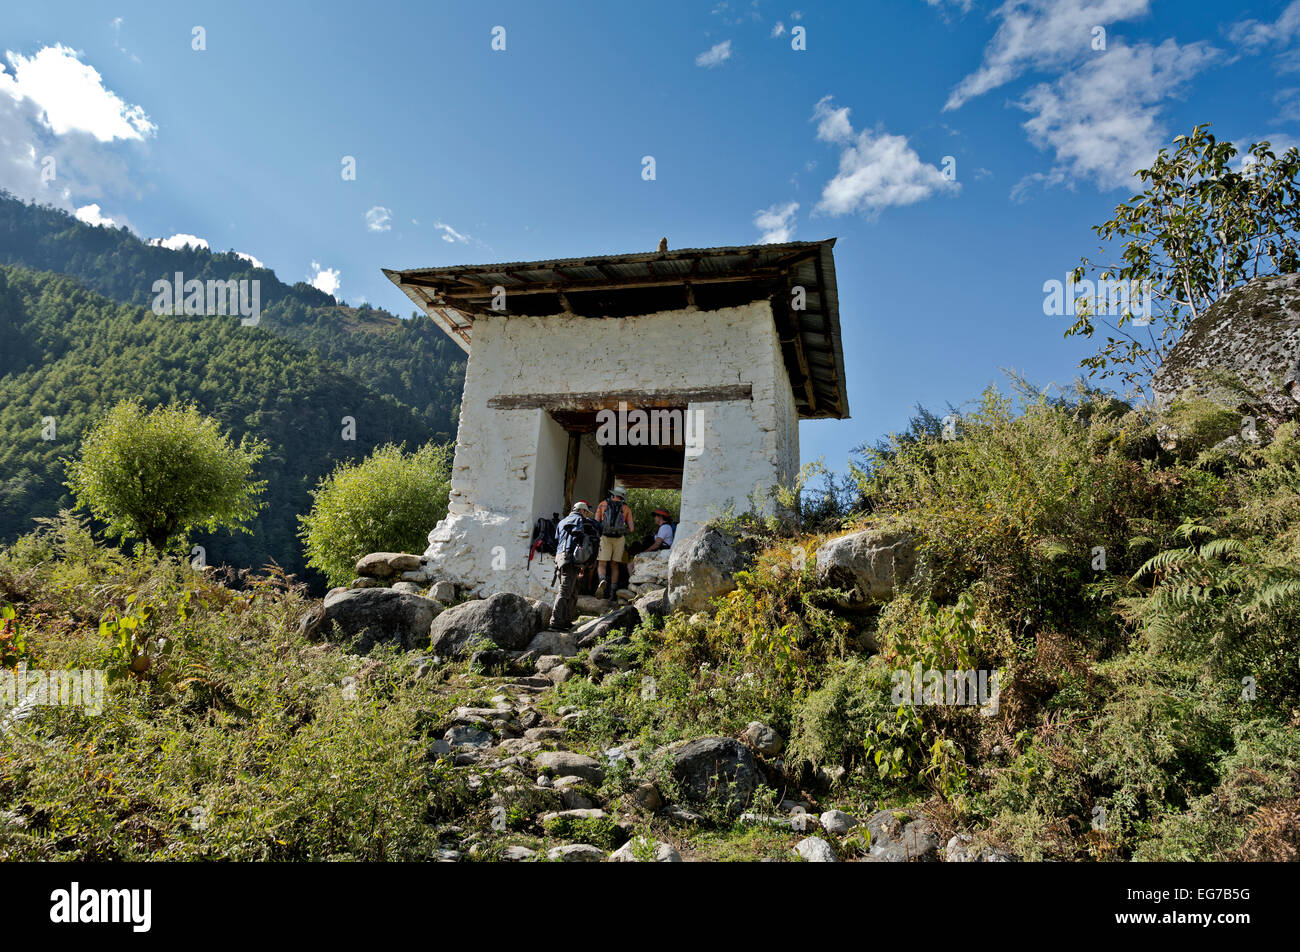 BHUTAN - Hikers on the Jhomolhari 2 Trek taking a break in an archway built to honor the Divine Madman in the Paro Chhu valley. Stock Photo